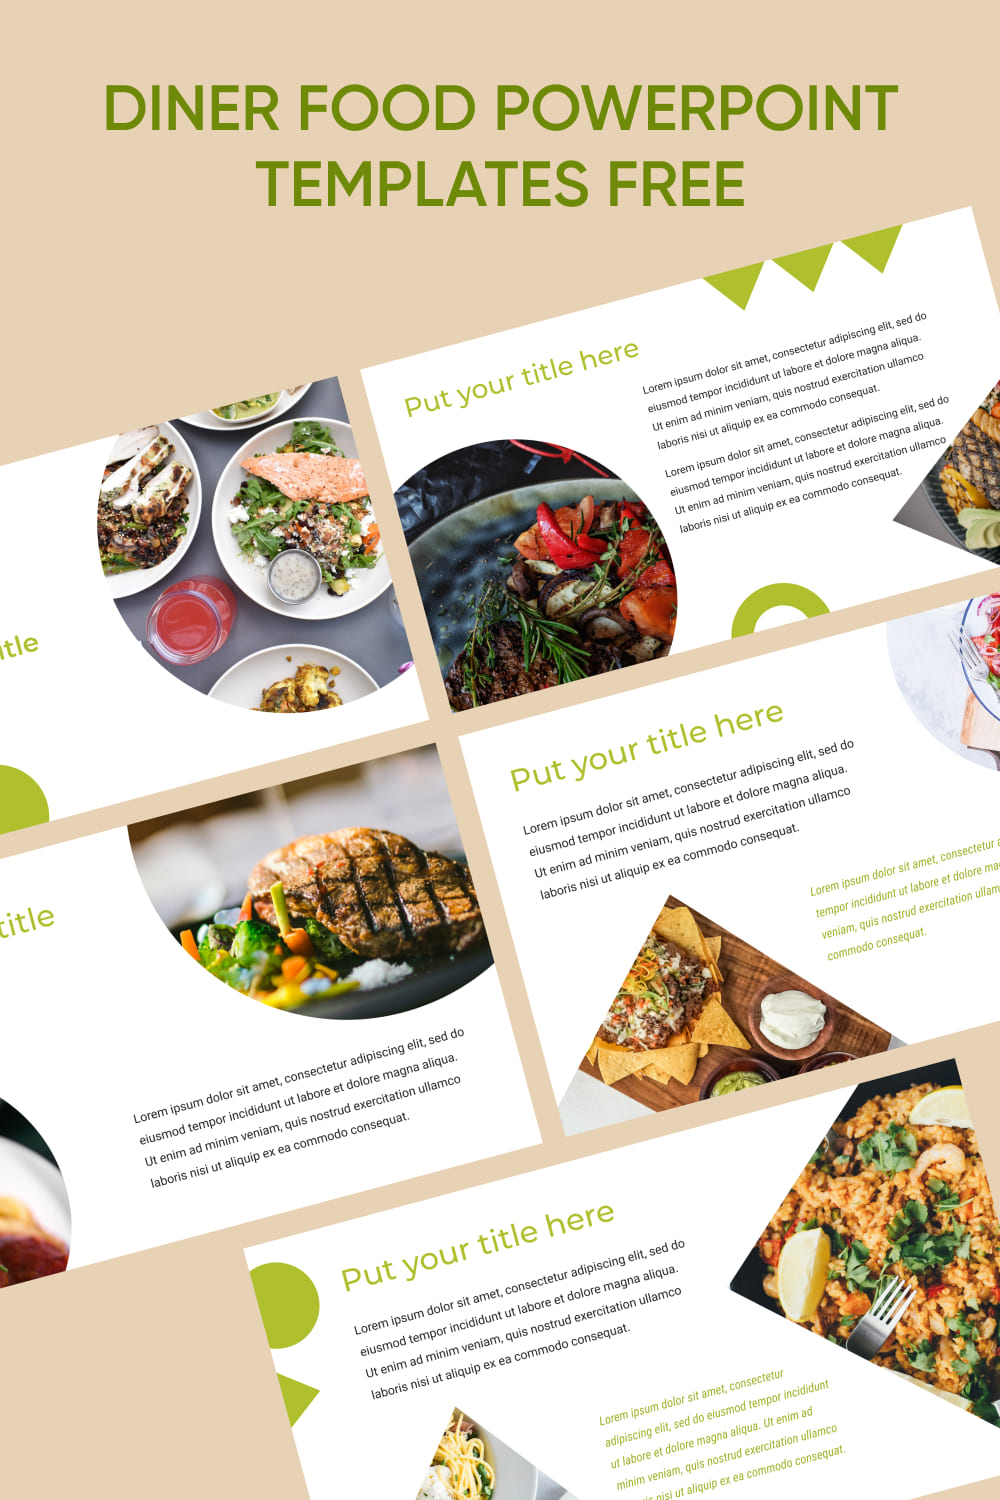 Pinterest Diner Food Powerpoint Templates Free.